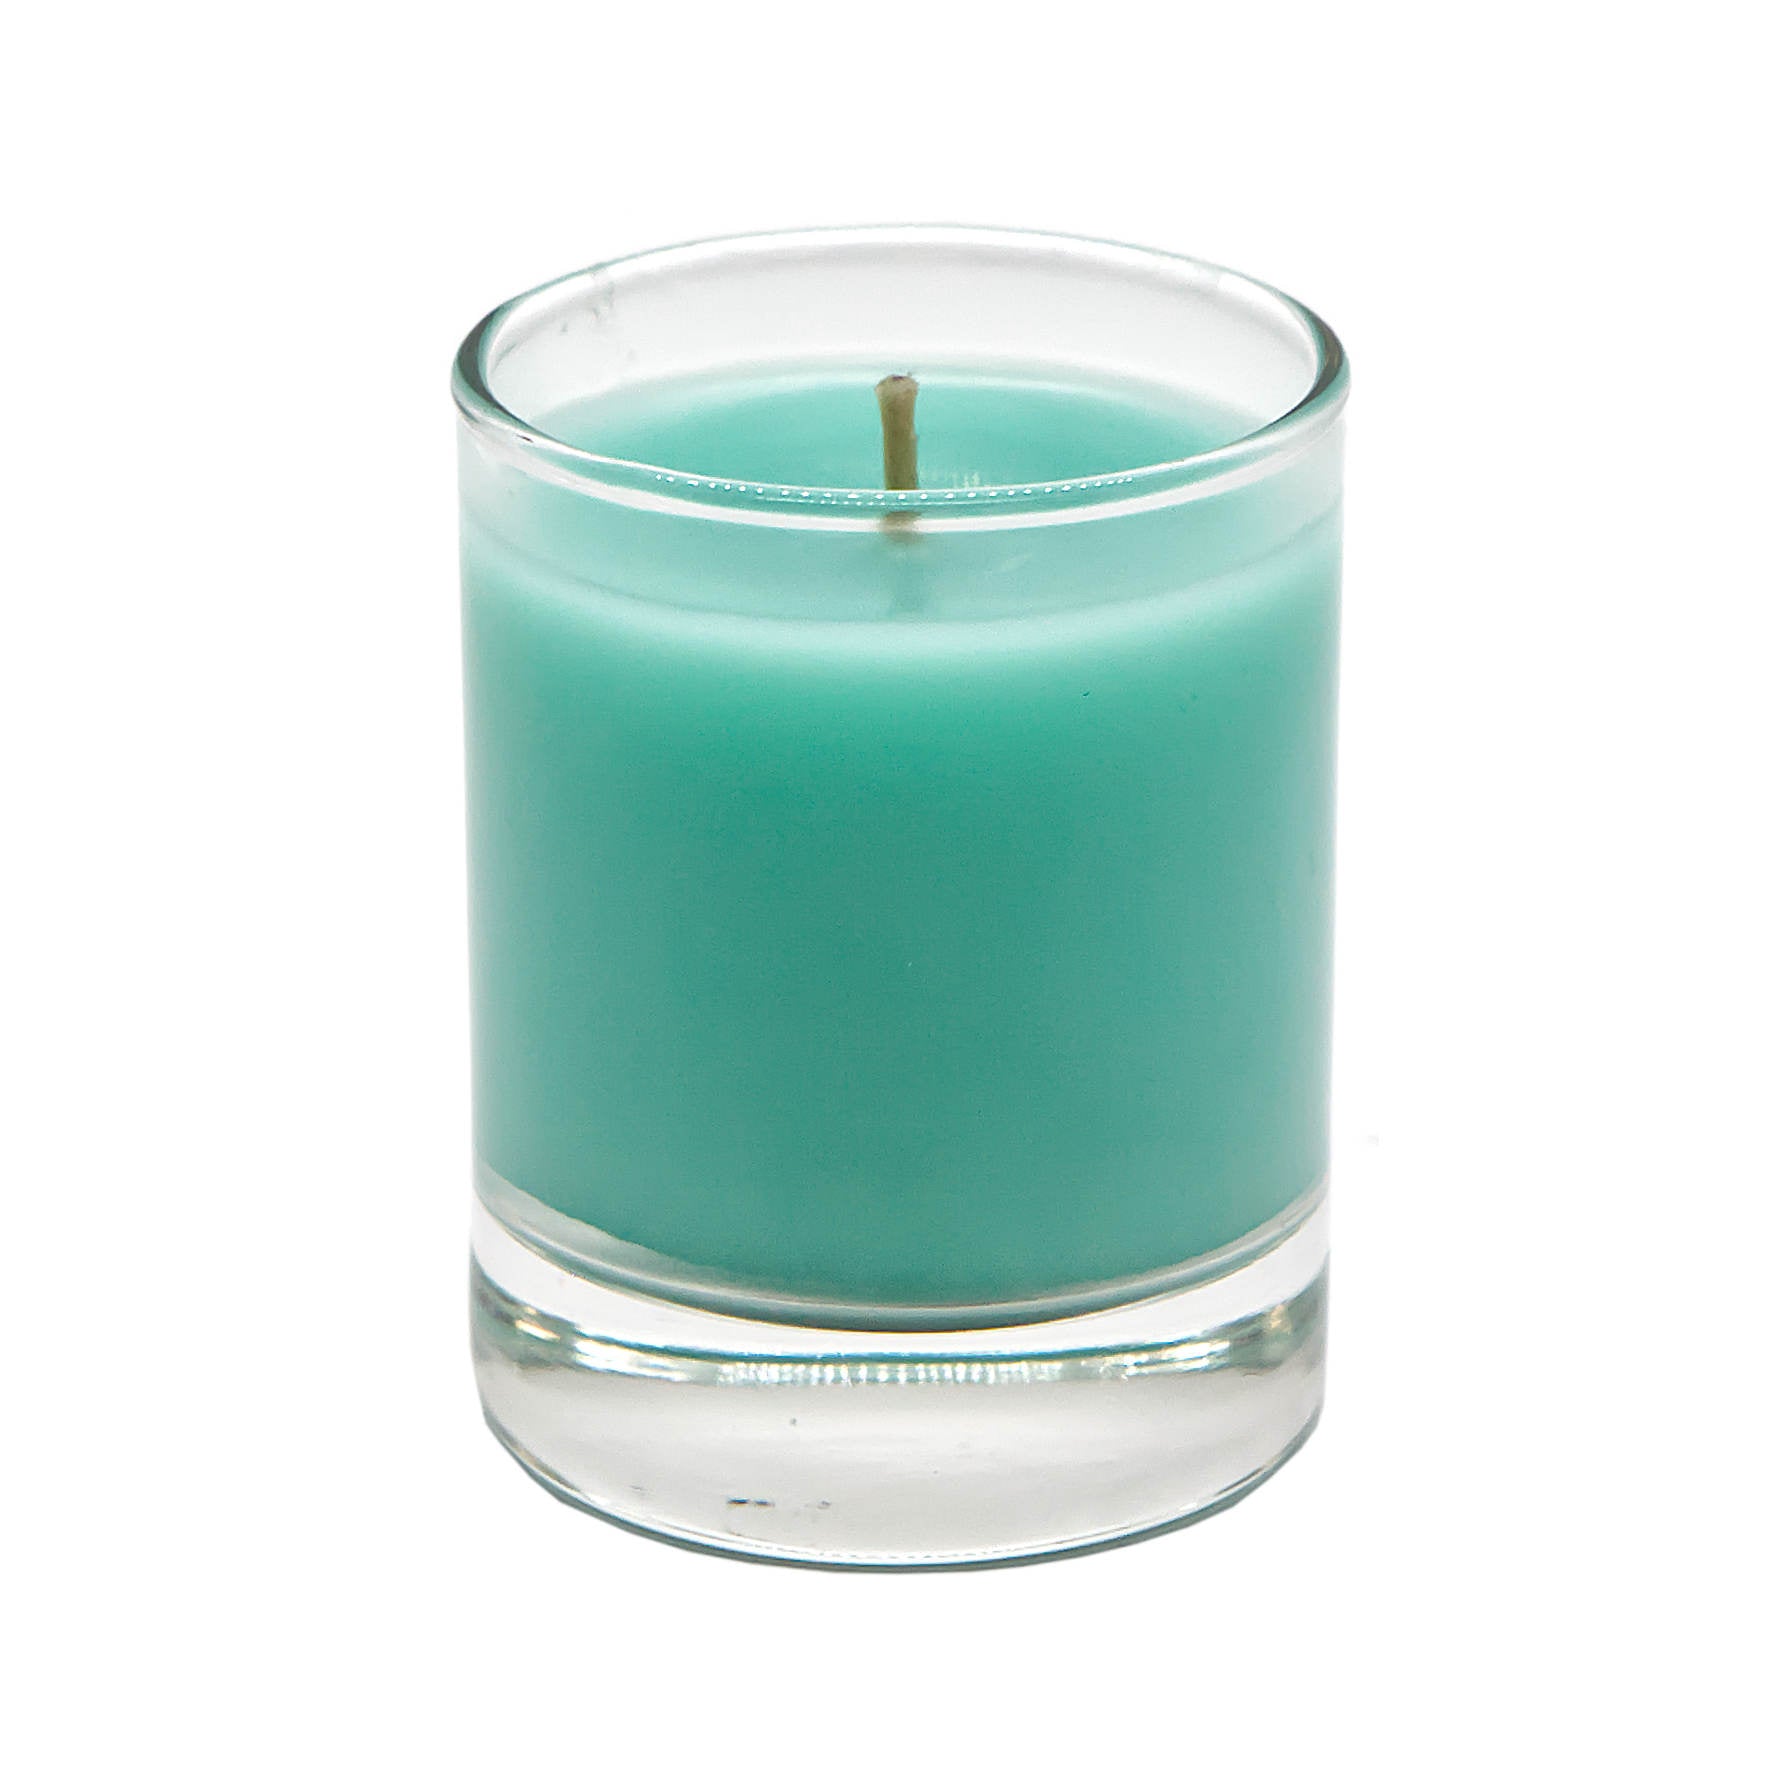 Turquoise & Caicos Votives Scented Candle